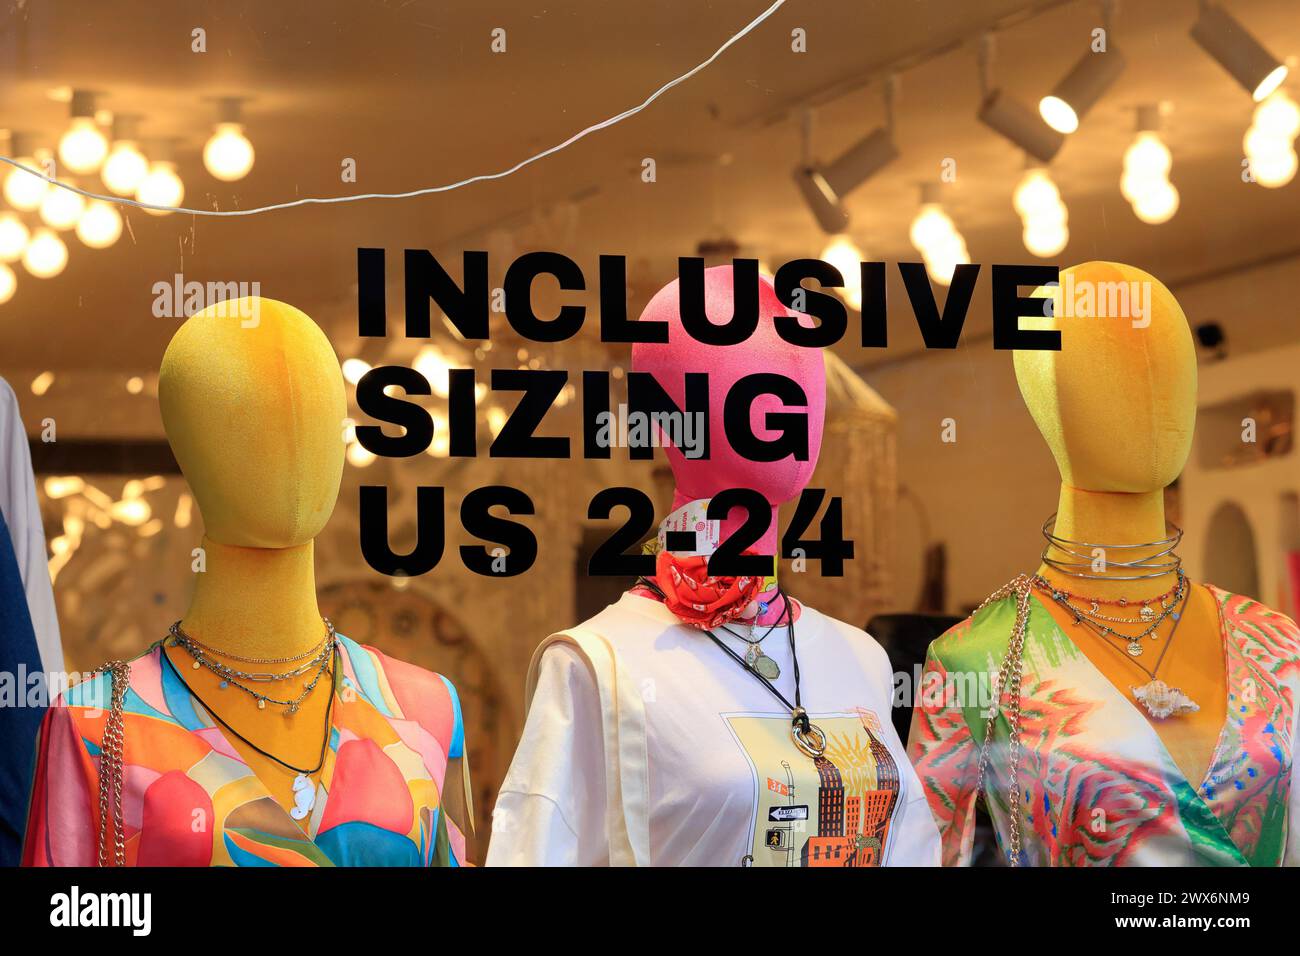 Window display advertising 'Inclusive Sizing US 2-24' at Never Fully Dressed clothing boutique, 243 Elizabeth St, New York City. Stock Photo